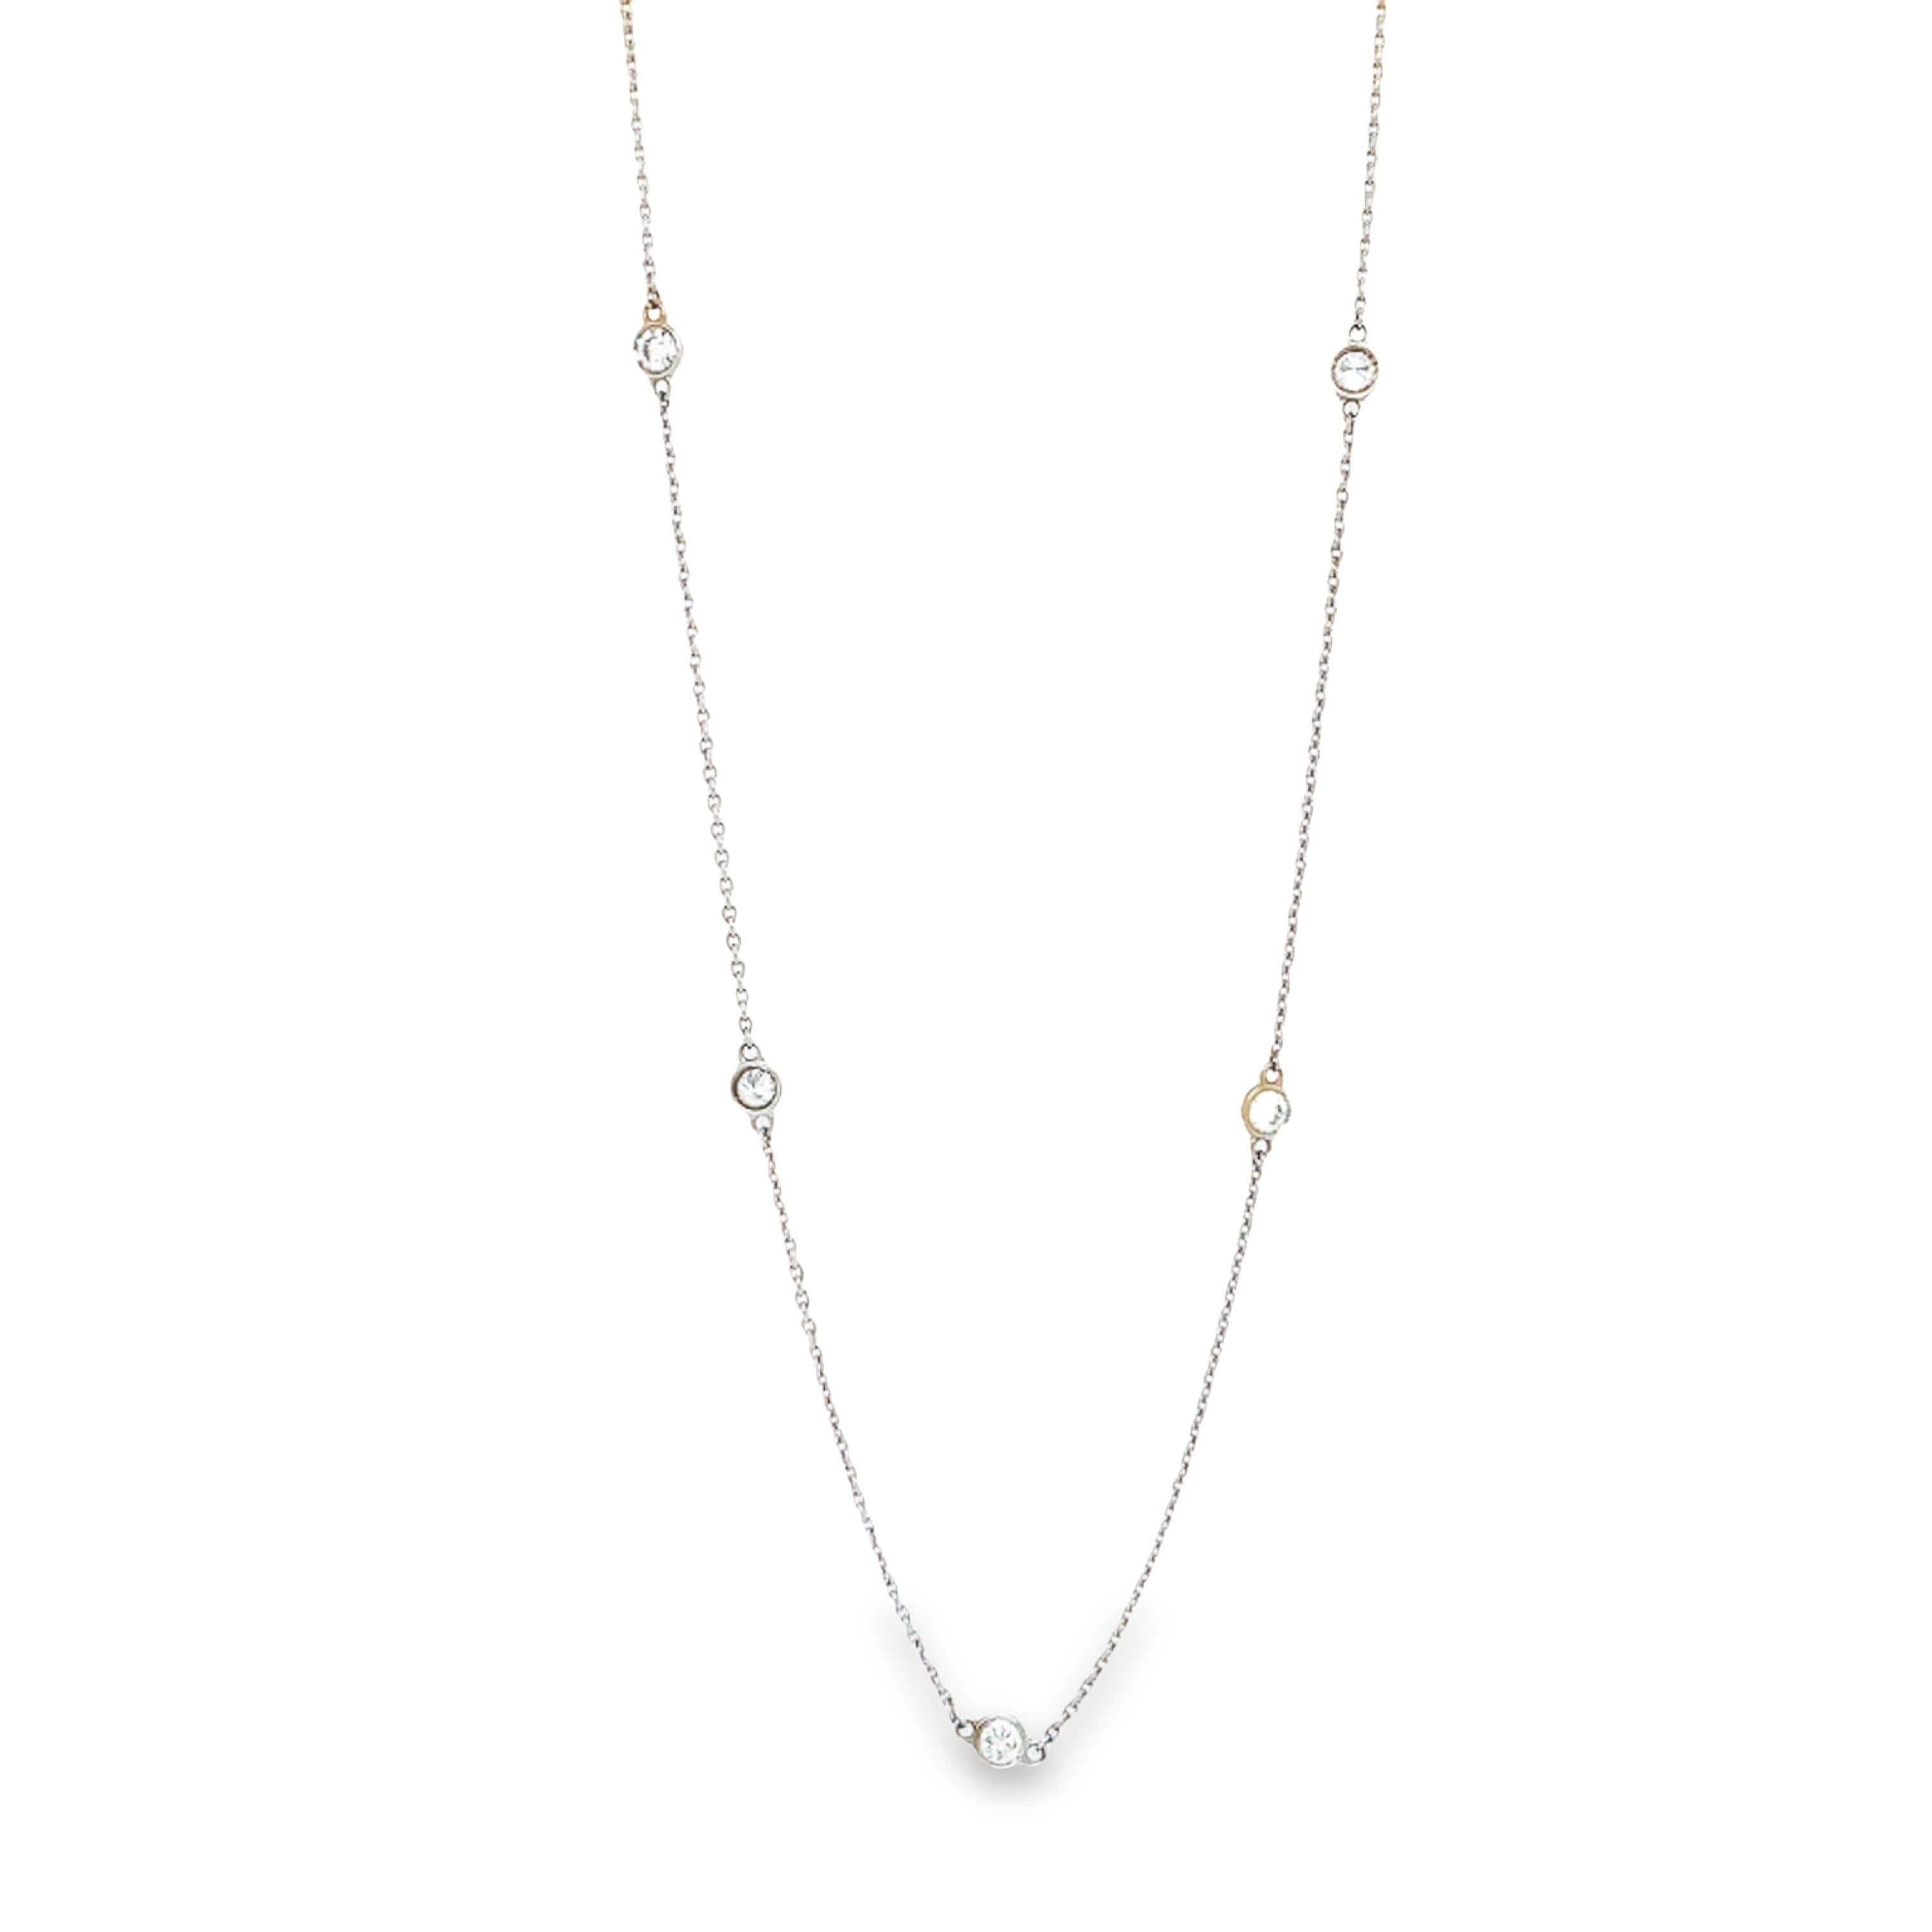 Round Cut Gems Are Forever Diamonds by the Yard 8 Round Bezel Necklace in 18k White Gold For Sale